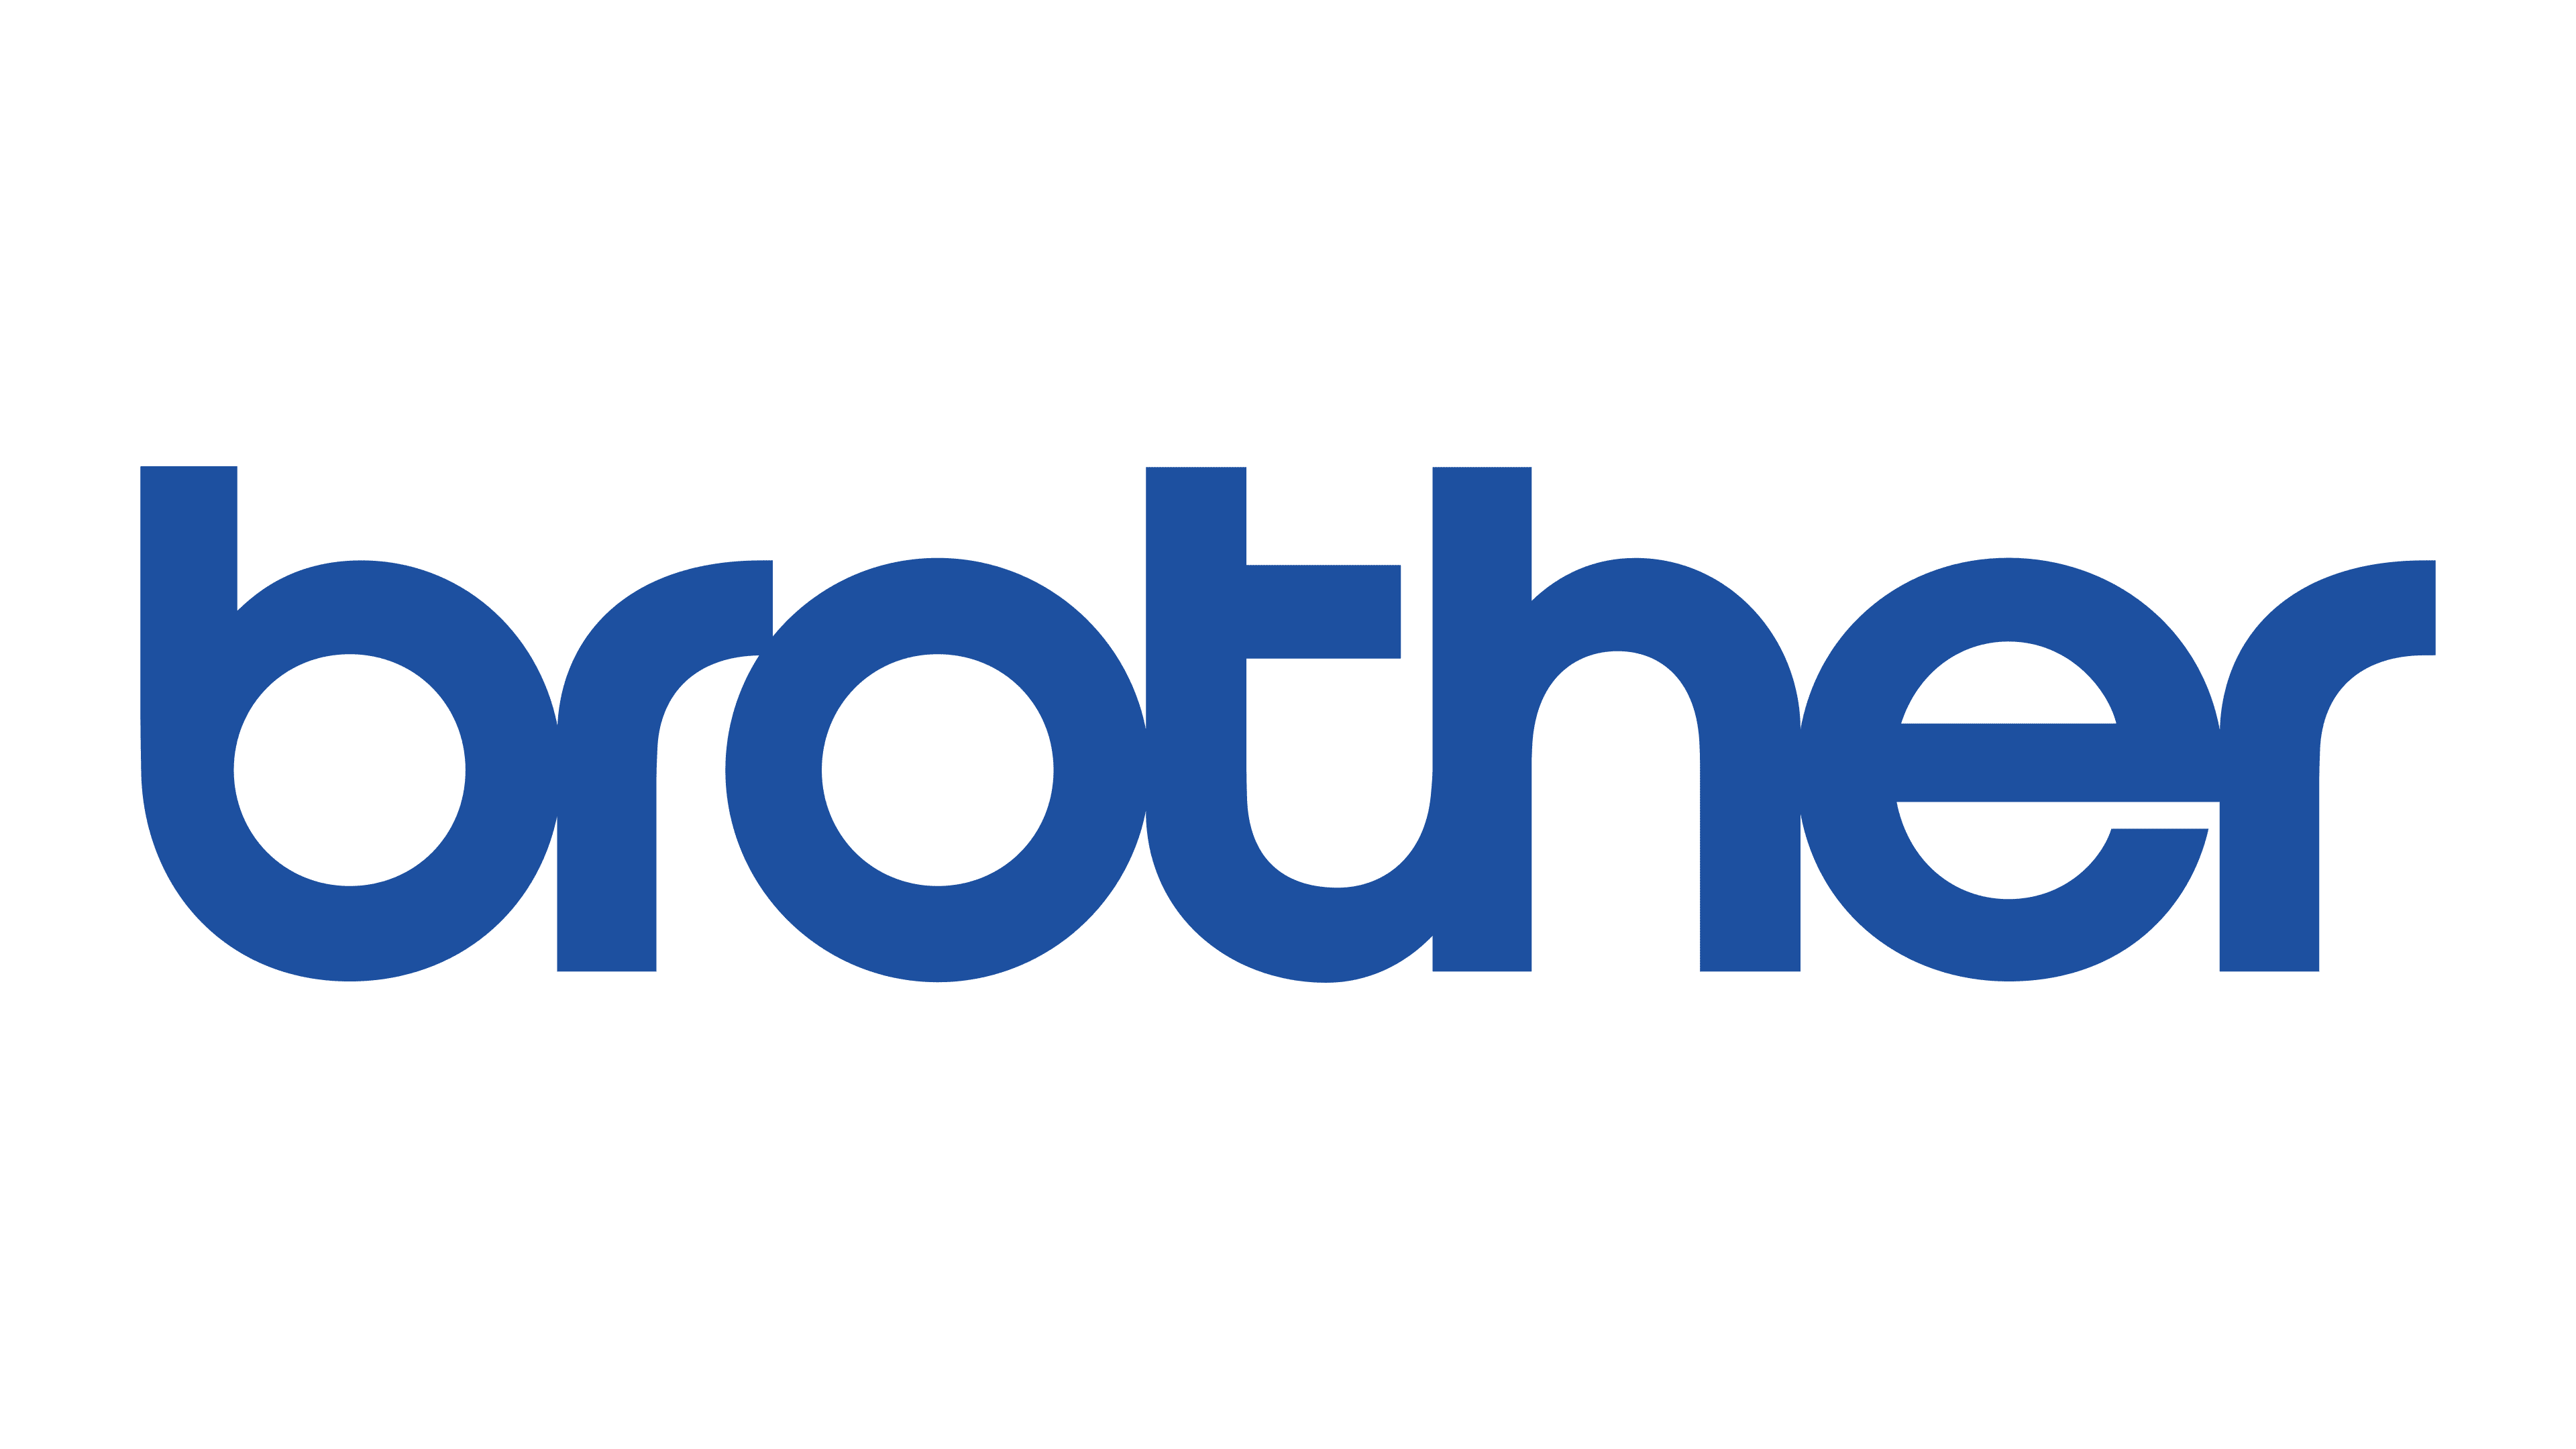 SalesChain Manages Brother Catalog of Machines